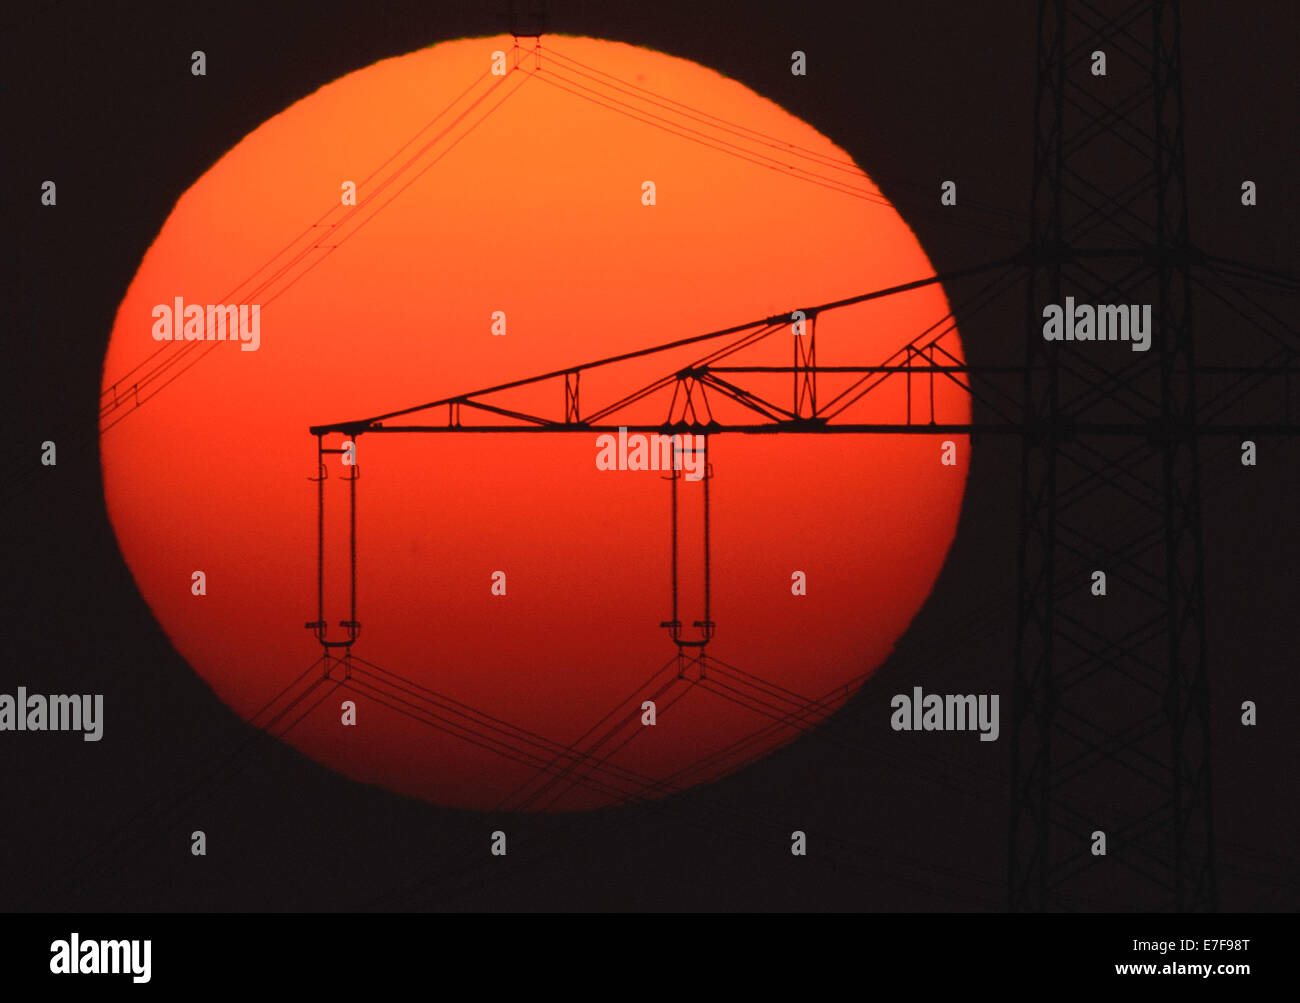 Sehnde, Germany. 16th Sep, 2014. Sunrise behind a power pylon near Sehnde, Germany, 16 September 2014. Indian summer, or Altweibersommer in German, is a weather phenomenon which often brings sunny weather between mid-September and the start of October. Photo: JULIAN STRATENSCHULTE/DPA/Alamy Live News Stock Photo